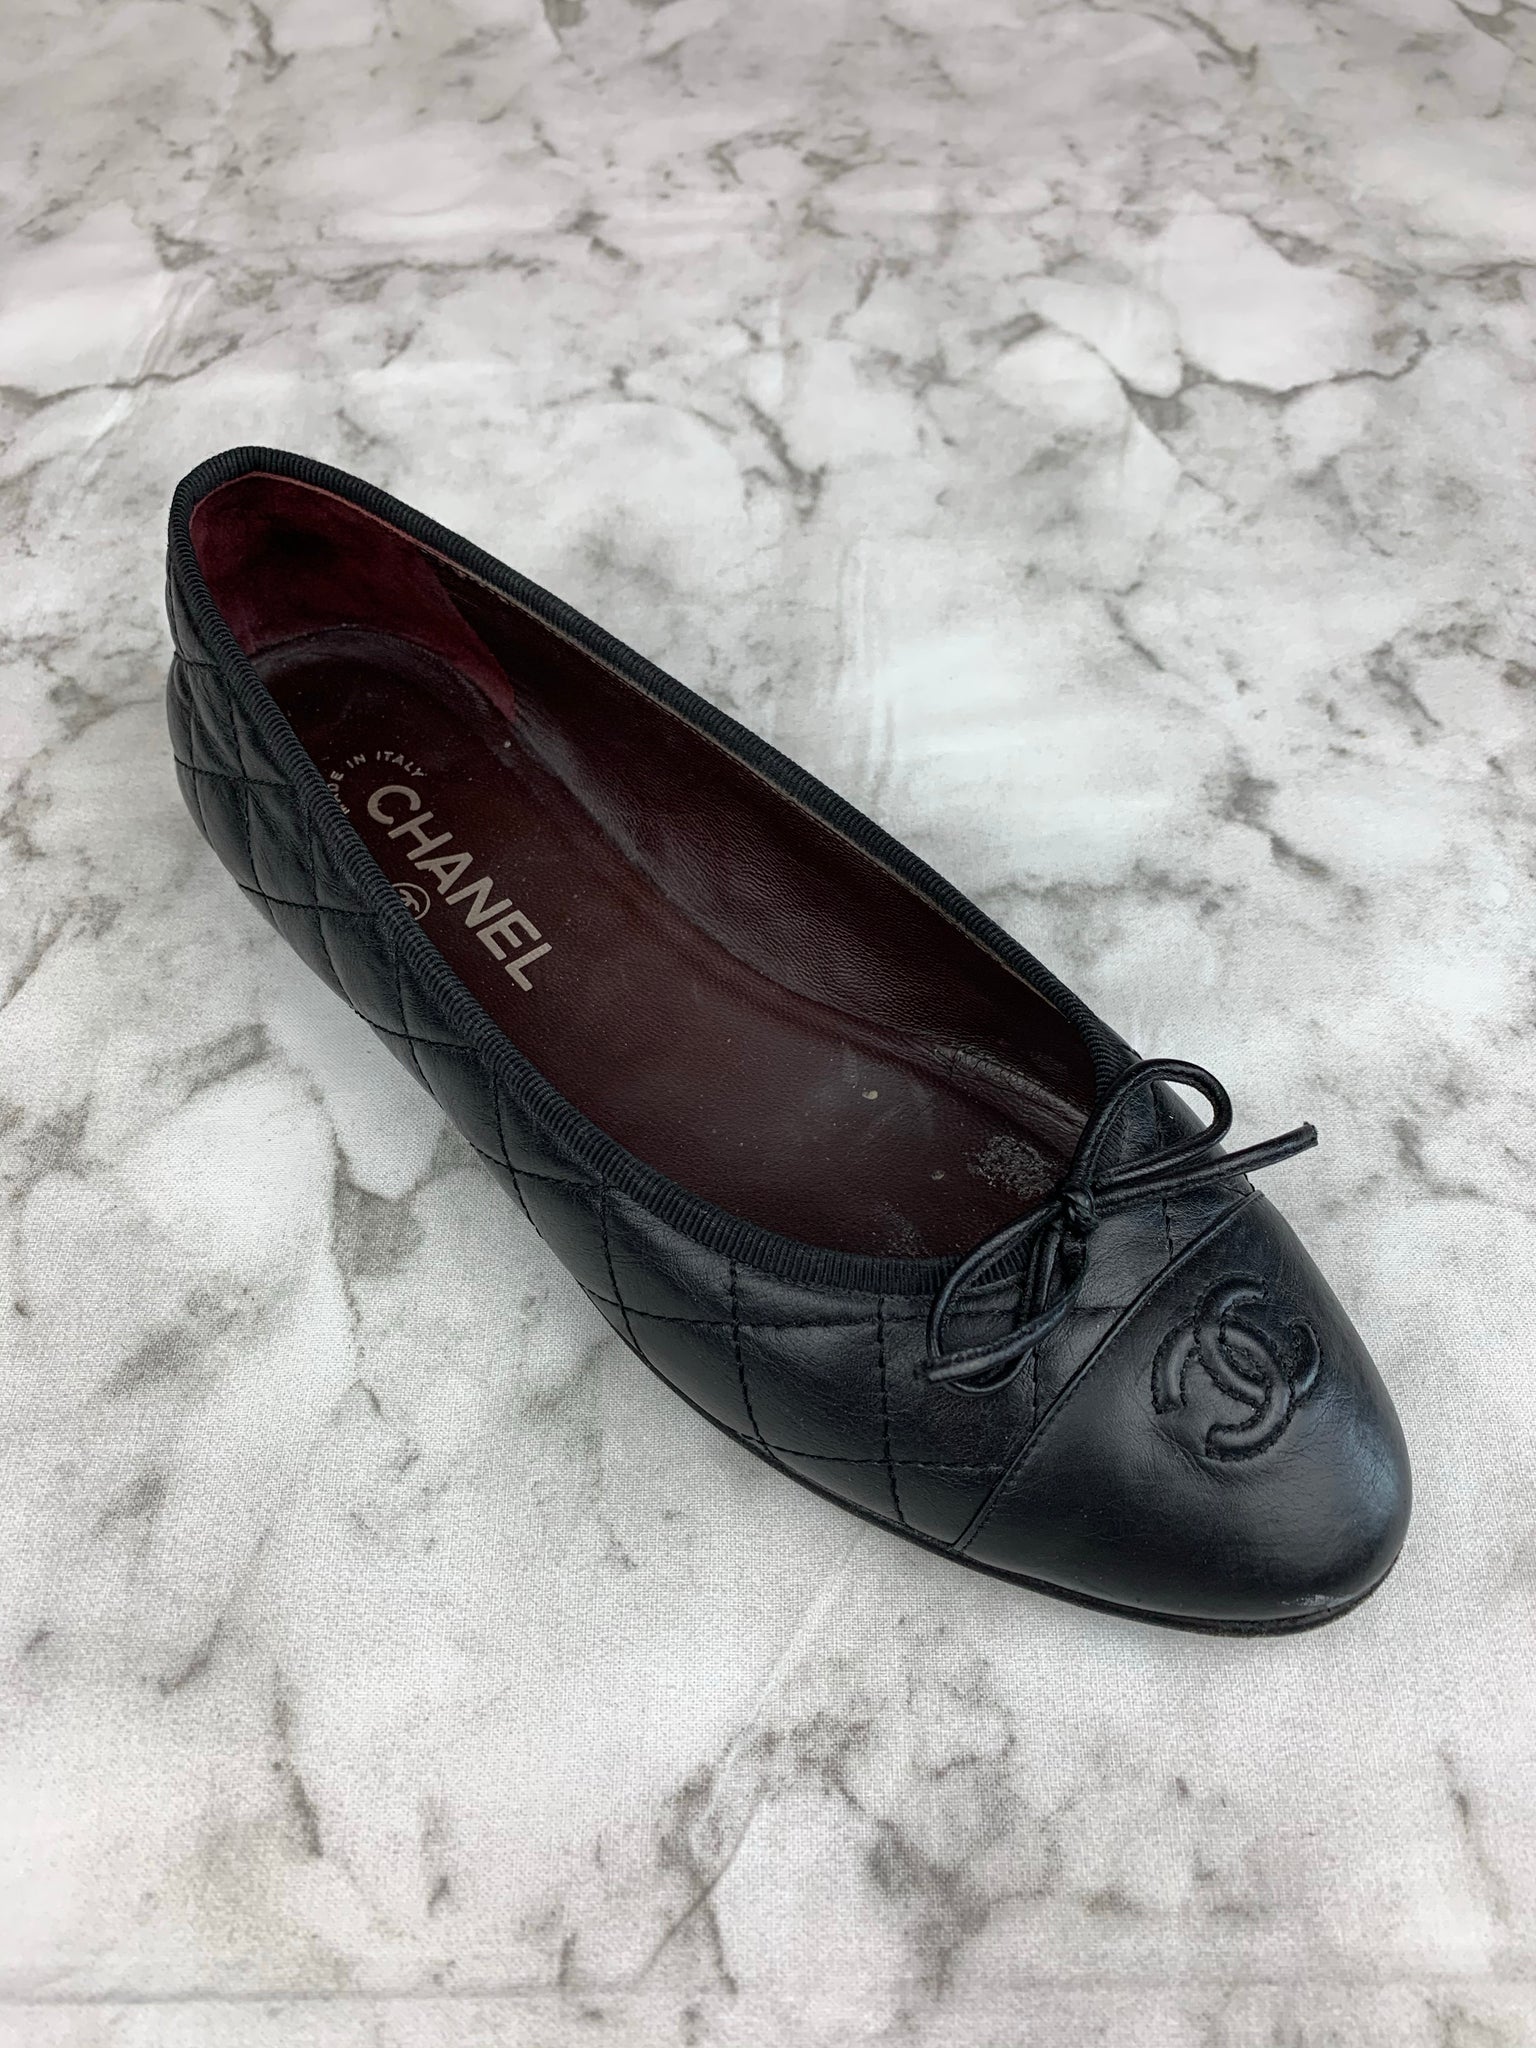 Chanel Ballerinas Ballet Flats Shoes Black Quilted 2023 Size 41.5 23A